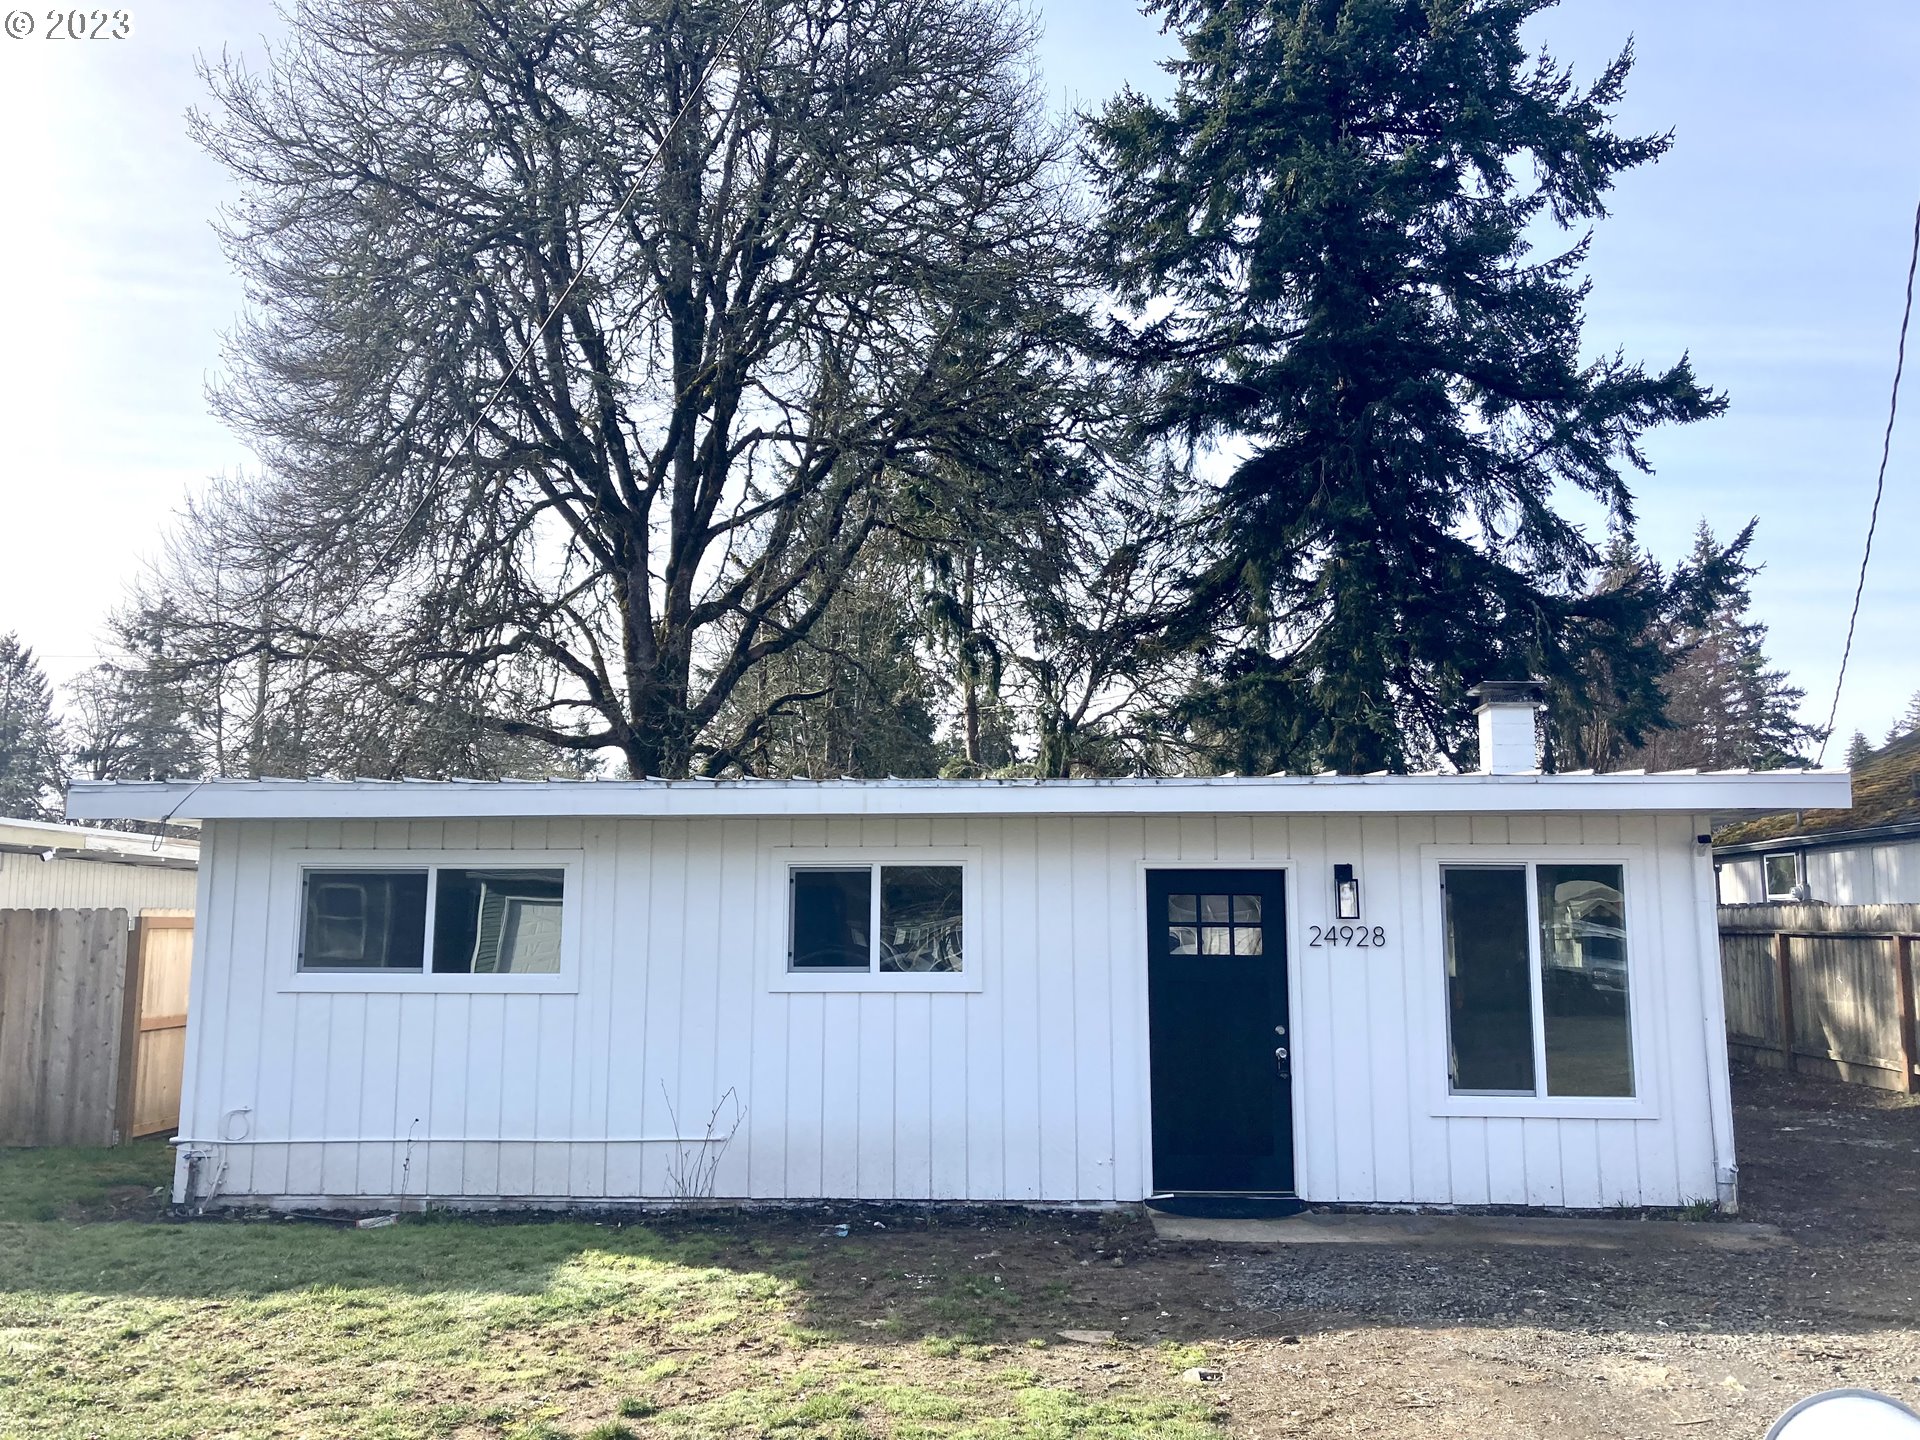 Affordable updated home in Veneta!  Detached extra room not included in the square footage or room count.  Vinyl windows, vinyl plank flooring and quartz countertops.  Large backyard.  Close to grade school and downtown Veneta!